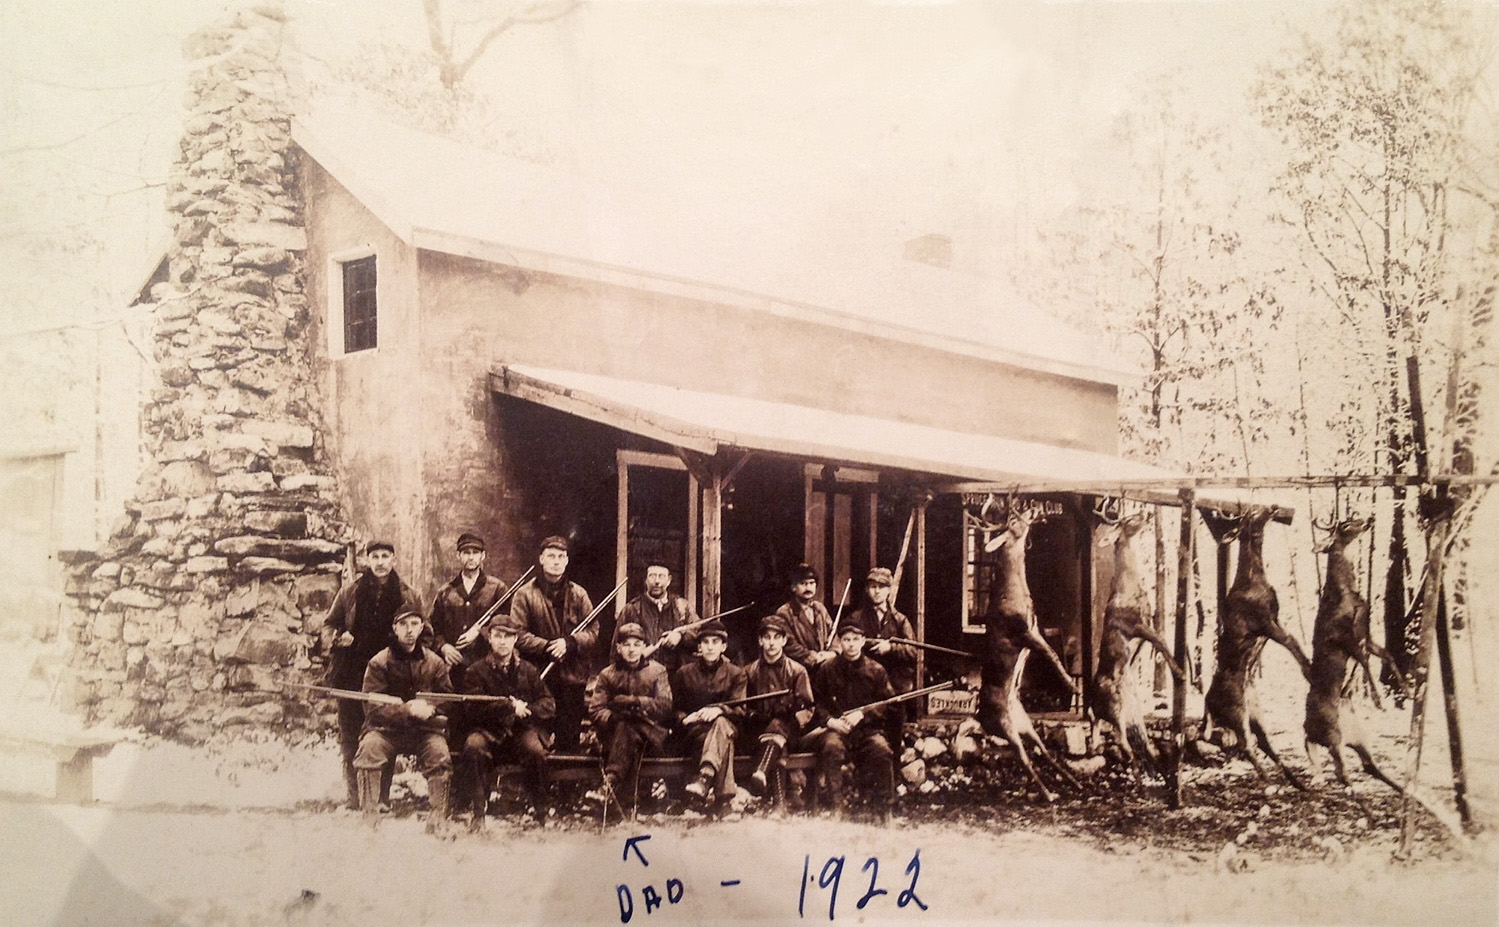 Picture taken of a hunting cabin in 1922. More than likely located somewhere in the wilderness of Pennsylvania. That would be my great grandfather in the picture. My grandmother's writing across the picture. View full size.